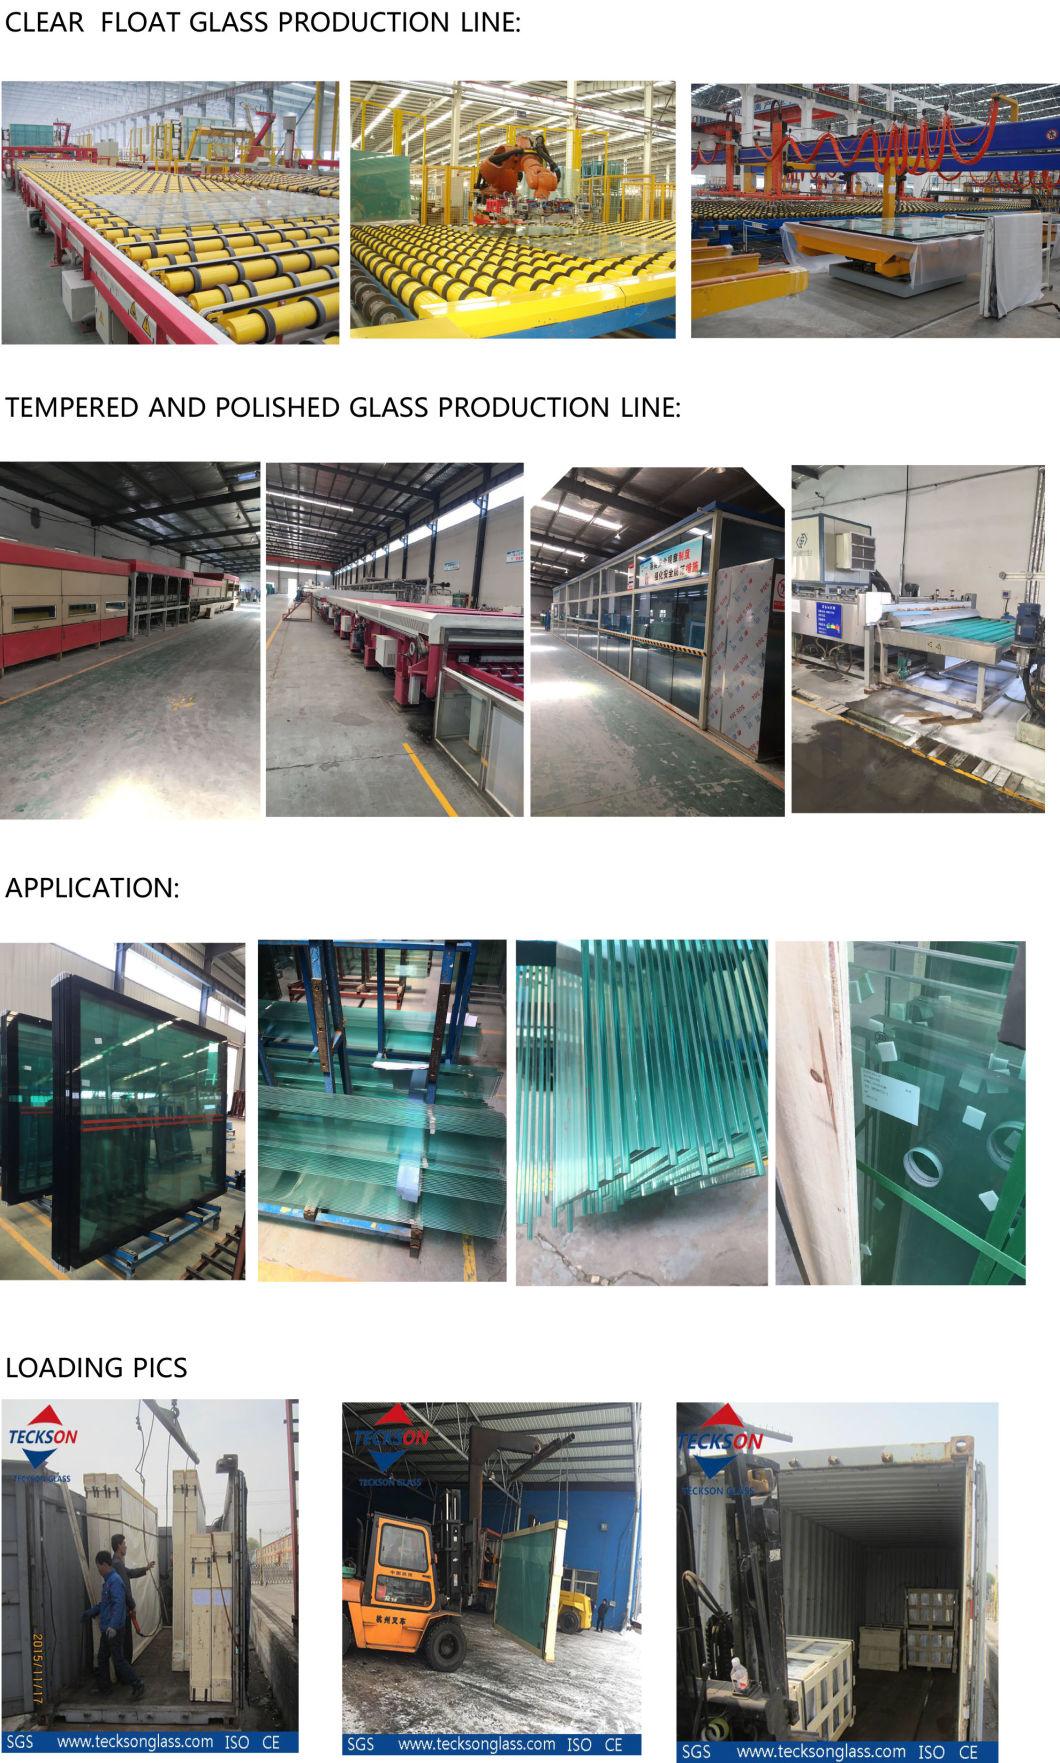 8/10/12mm Wholesale Clear Float / Ordinary Glass for Windows